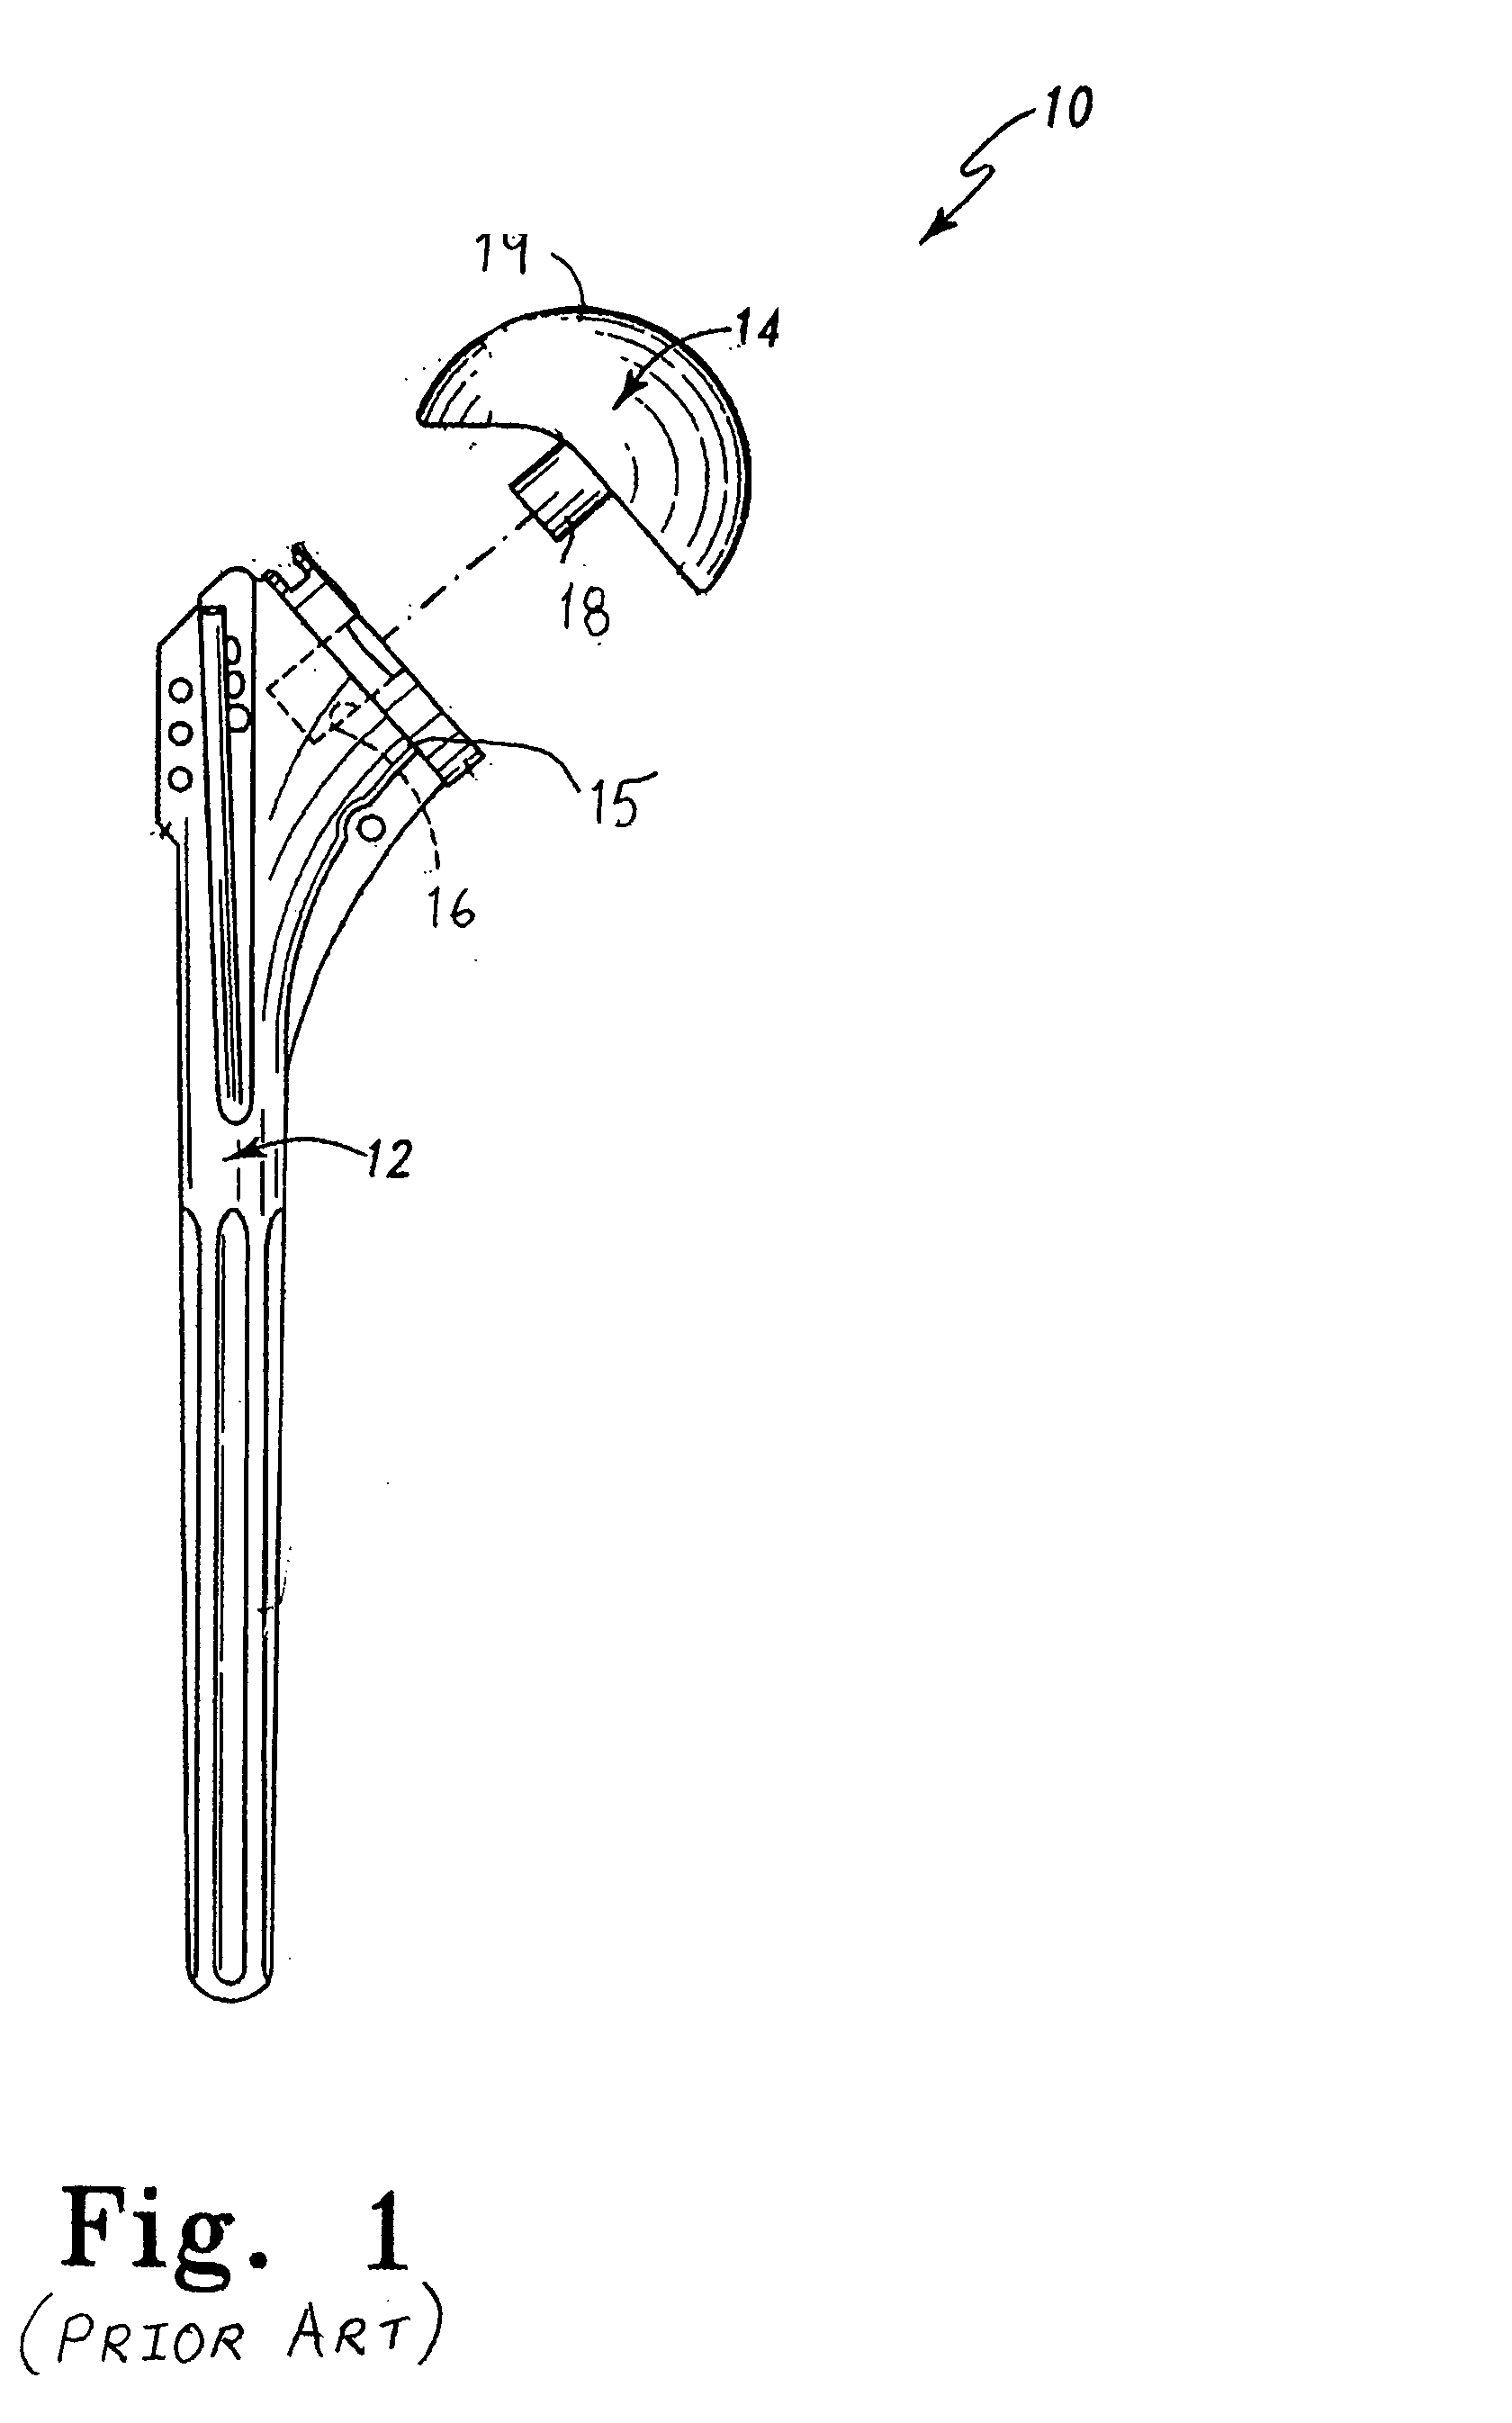 Joint prosthesis with infinitely positionable head